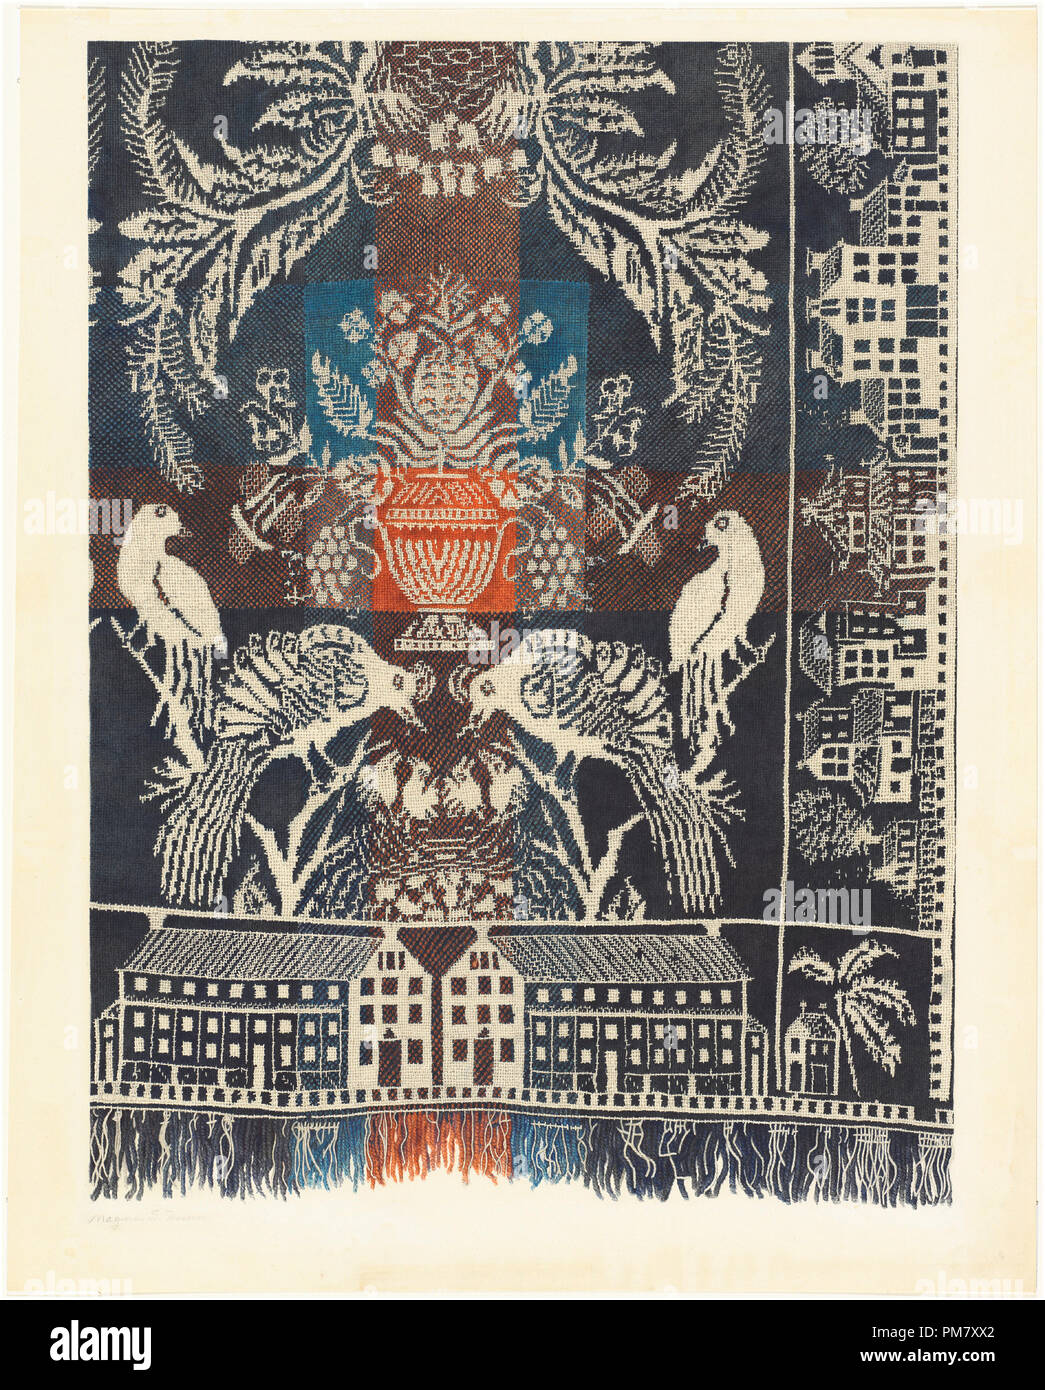 Boston Town Coverlet. Dated: 1935/1942. Dimensions: overall: 67.3 x 54.2 cm (26 1/2 x 21 5/16 in.)  Original IAD Object: 84' long; 96' wide. Medium: watercolor, pen and ink, and graphite on paper. Museum: National Gallery of Art, Washington DC. Author: Magnus S. Fossum. Stock Photo